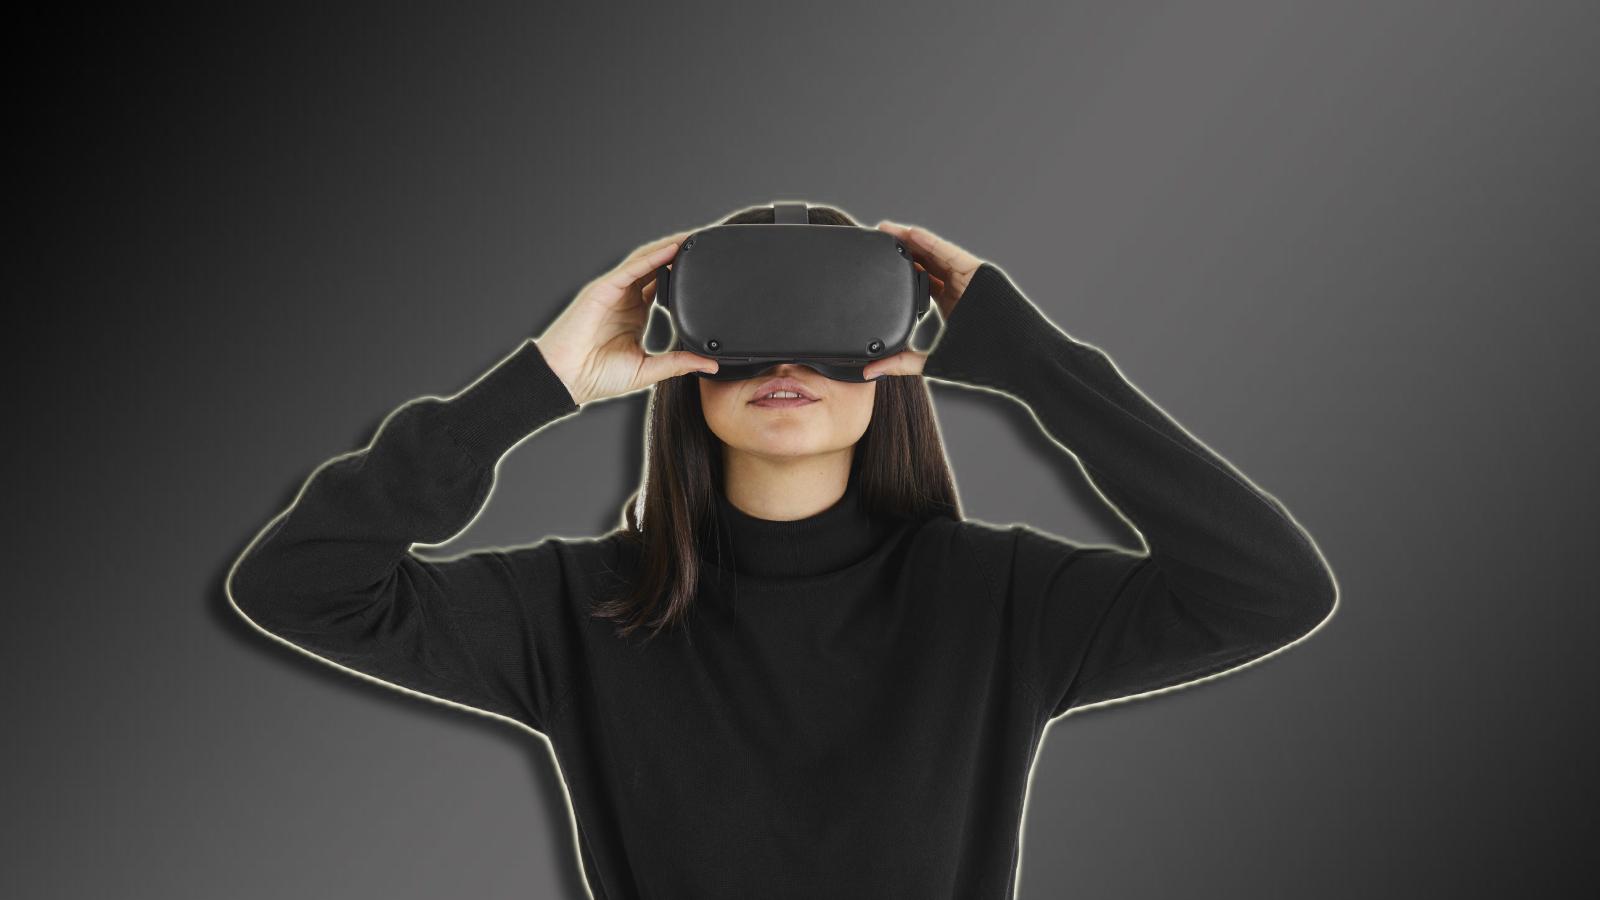 A woman wearing a VR headset on a dark bacground